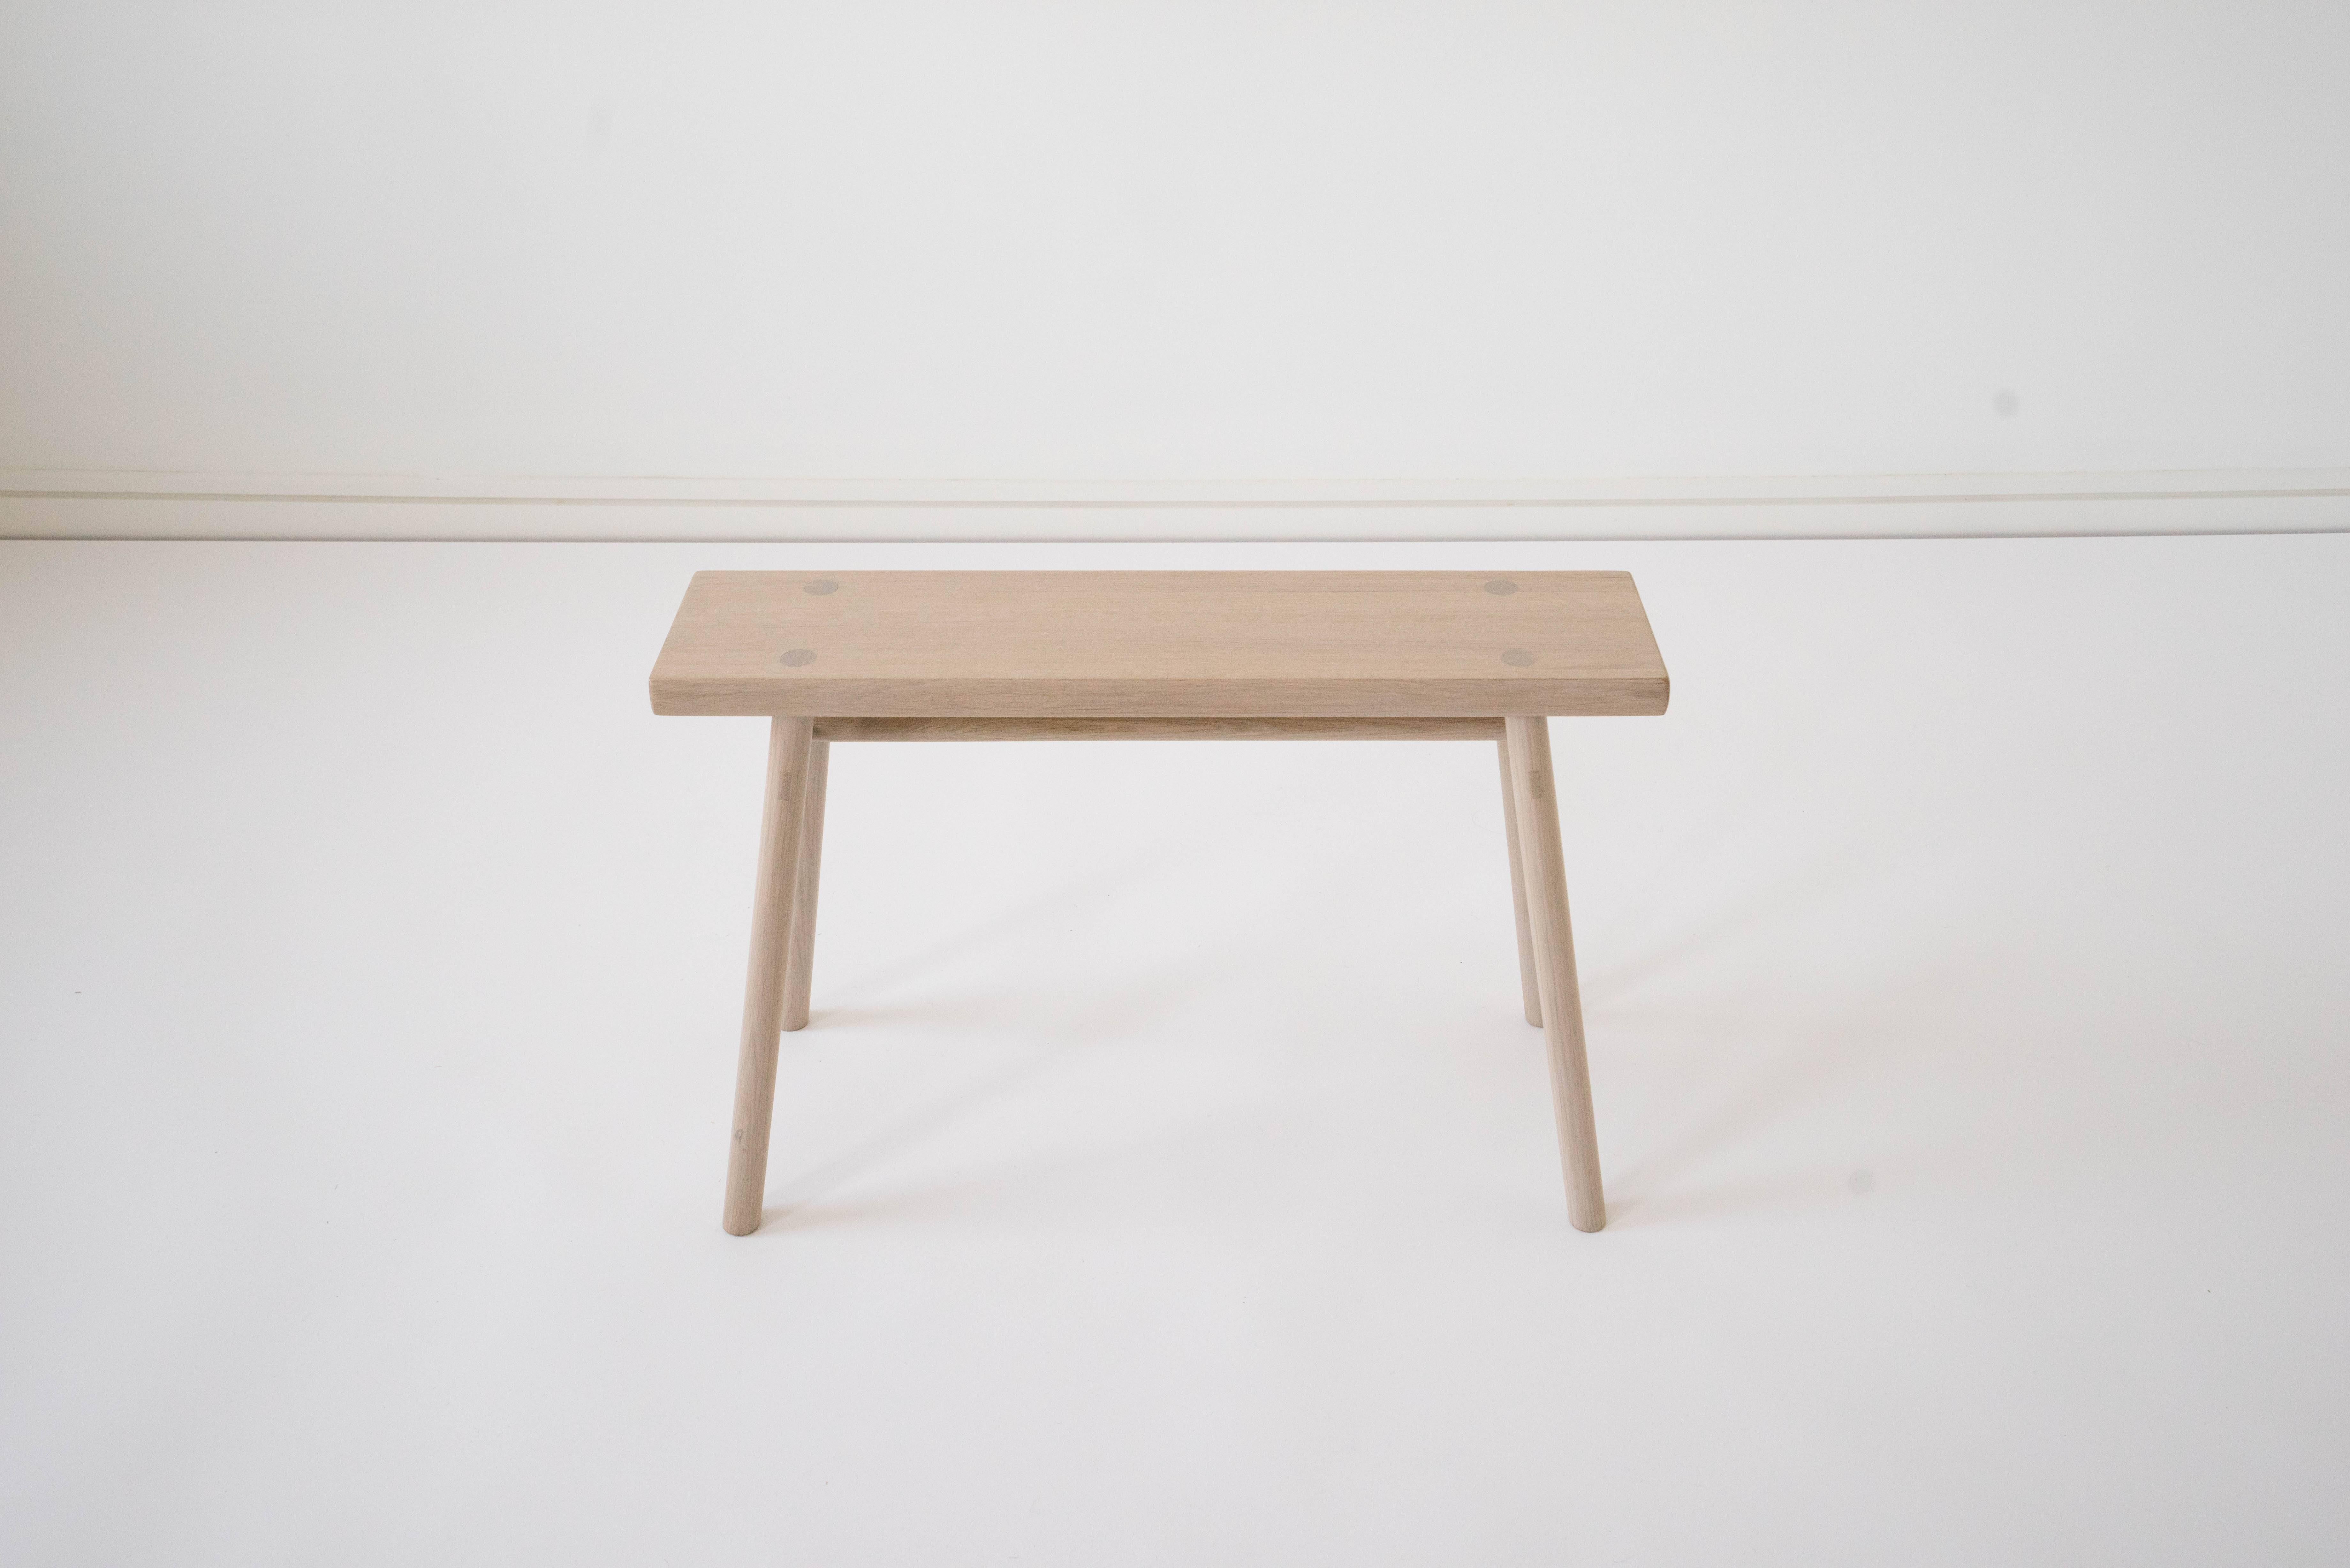 Sun at Six is a contemporary furniture design studio that works with traditional Chinese joinery masters to handcraft our pieces using traditional joinery. Handcrafted using traditional joinery. Designed at a size that allows this stool to serve as